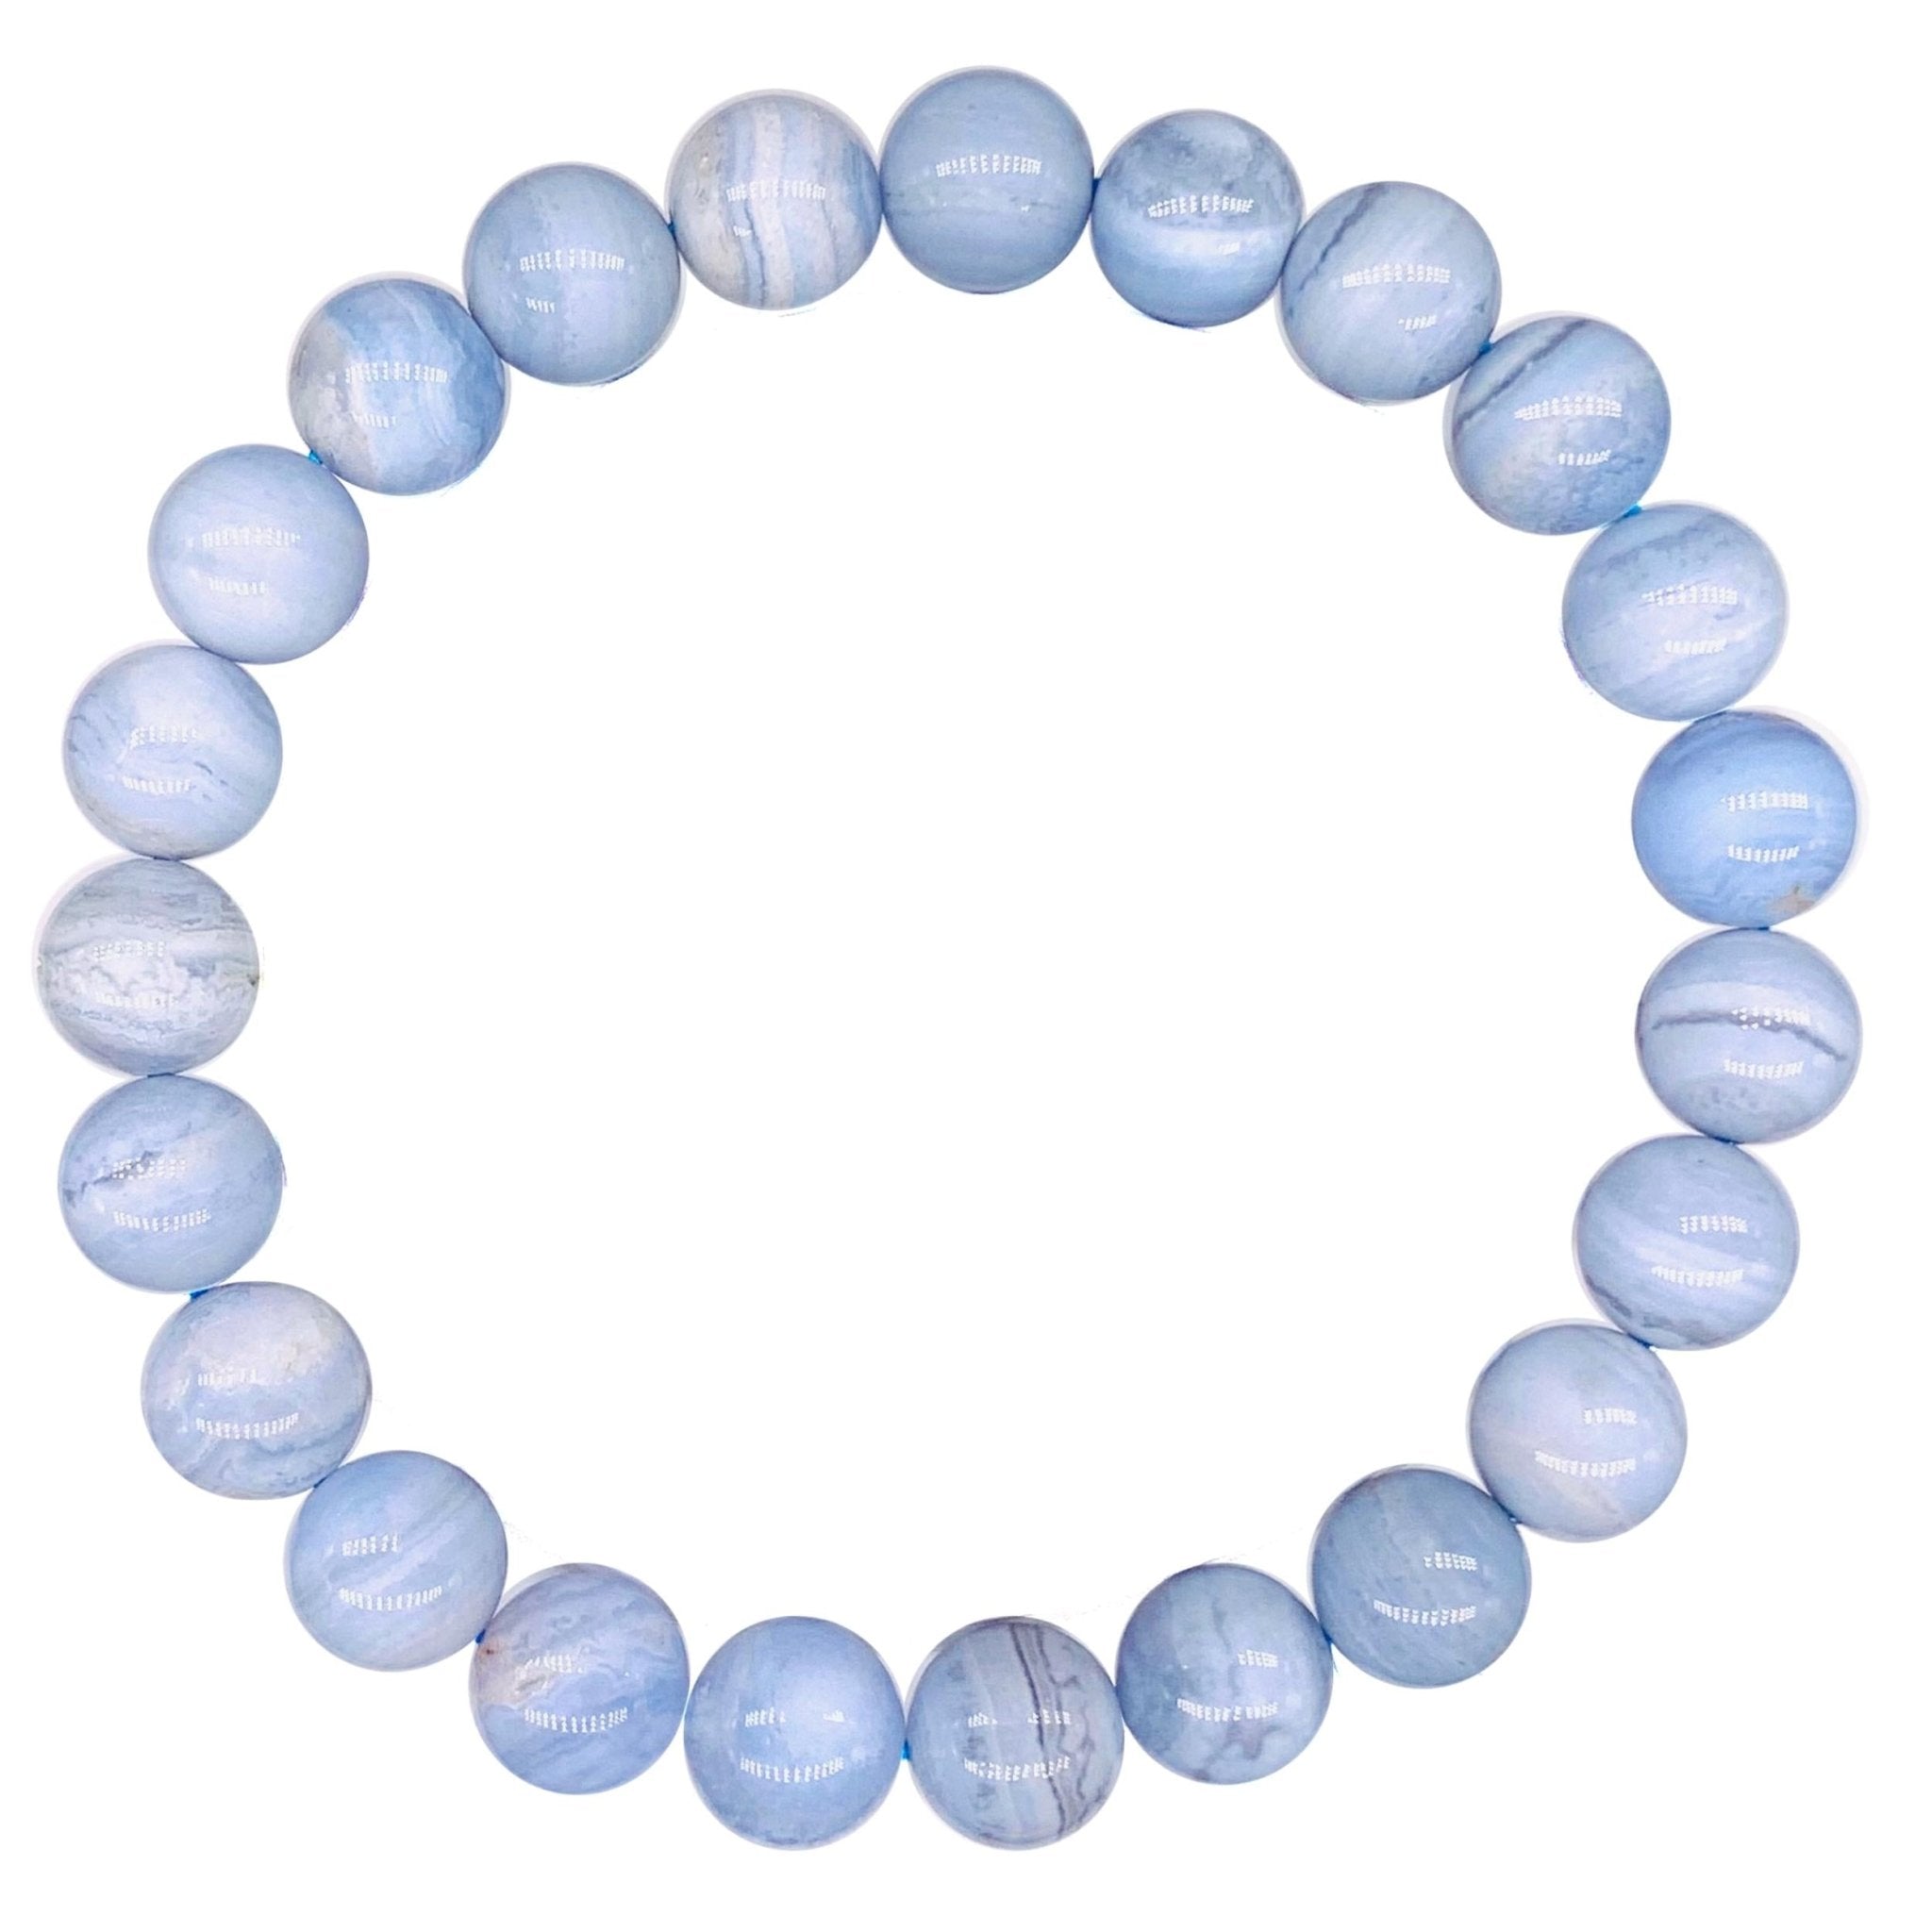 Crystal Beaded Bracelet - Blue Lace Agate - The Kindness Cause